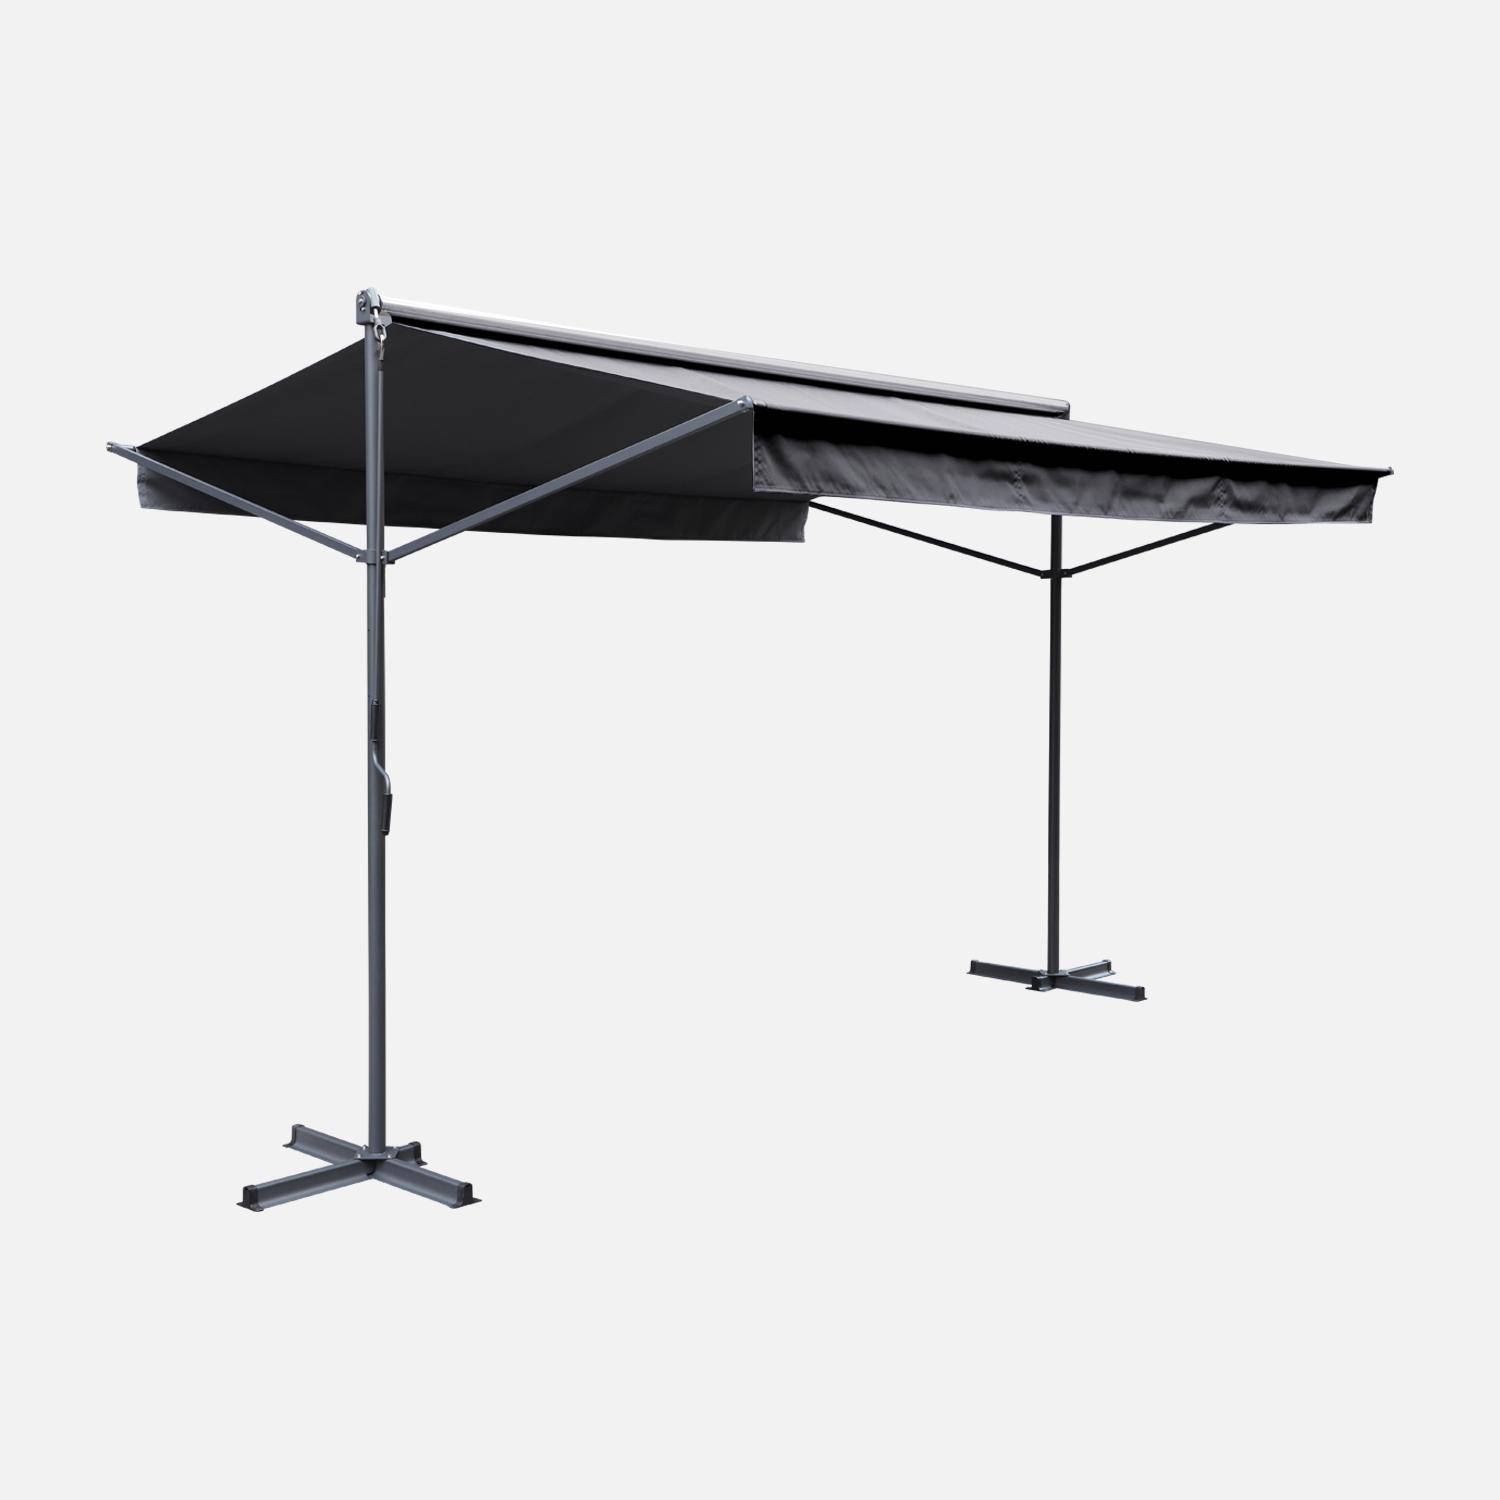 Rectractable patio awning - Manual crank system, freestanding awning, coated polyester canvas - Penne 4x3m - Grey Photo1